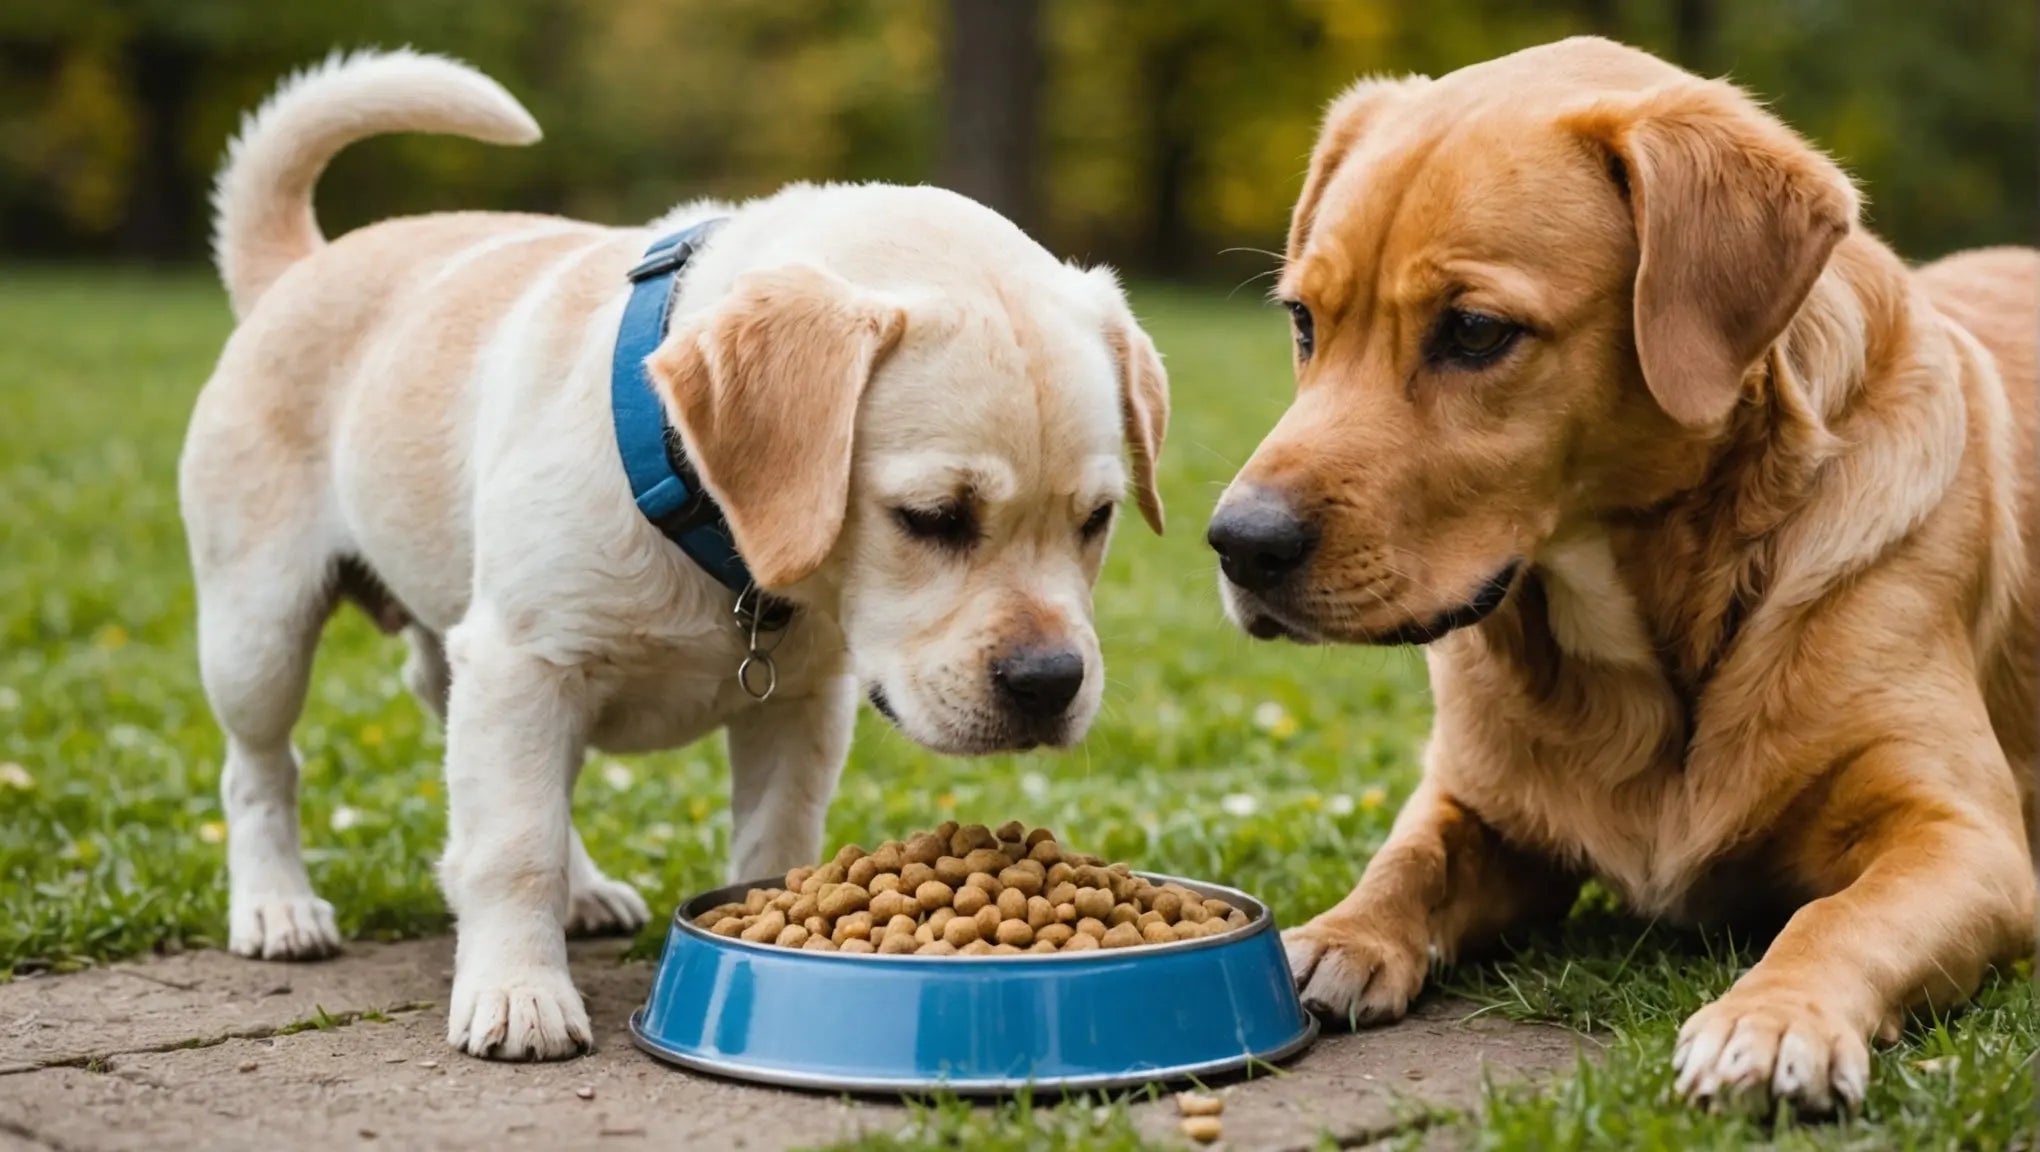 Choosing the Right Dog Food: Quality and Nutrition Matter